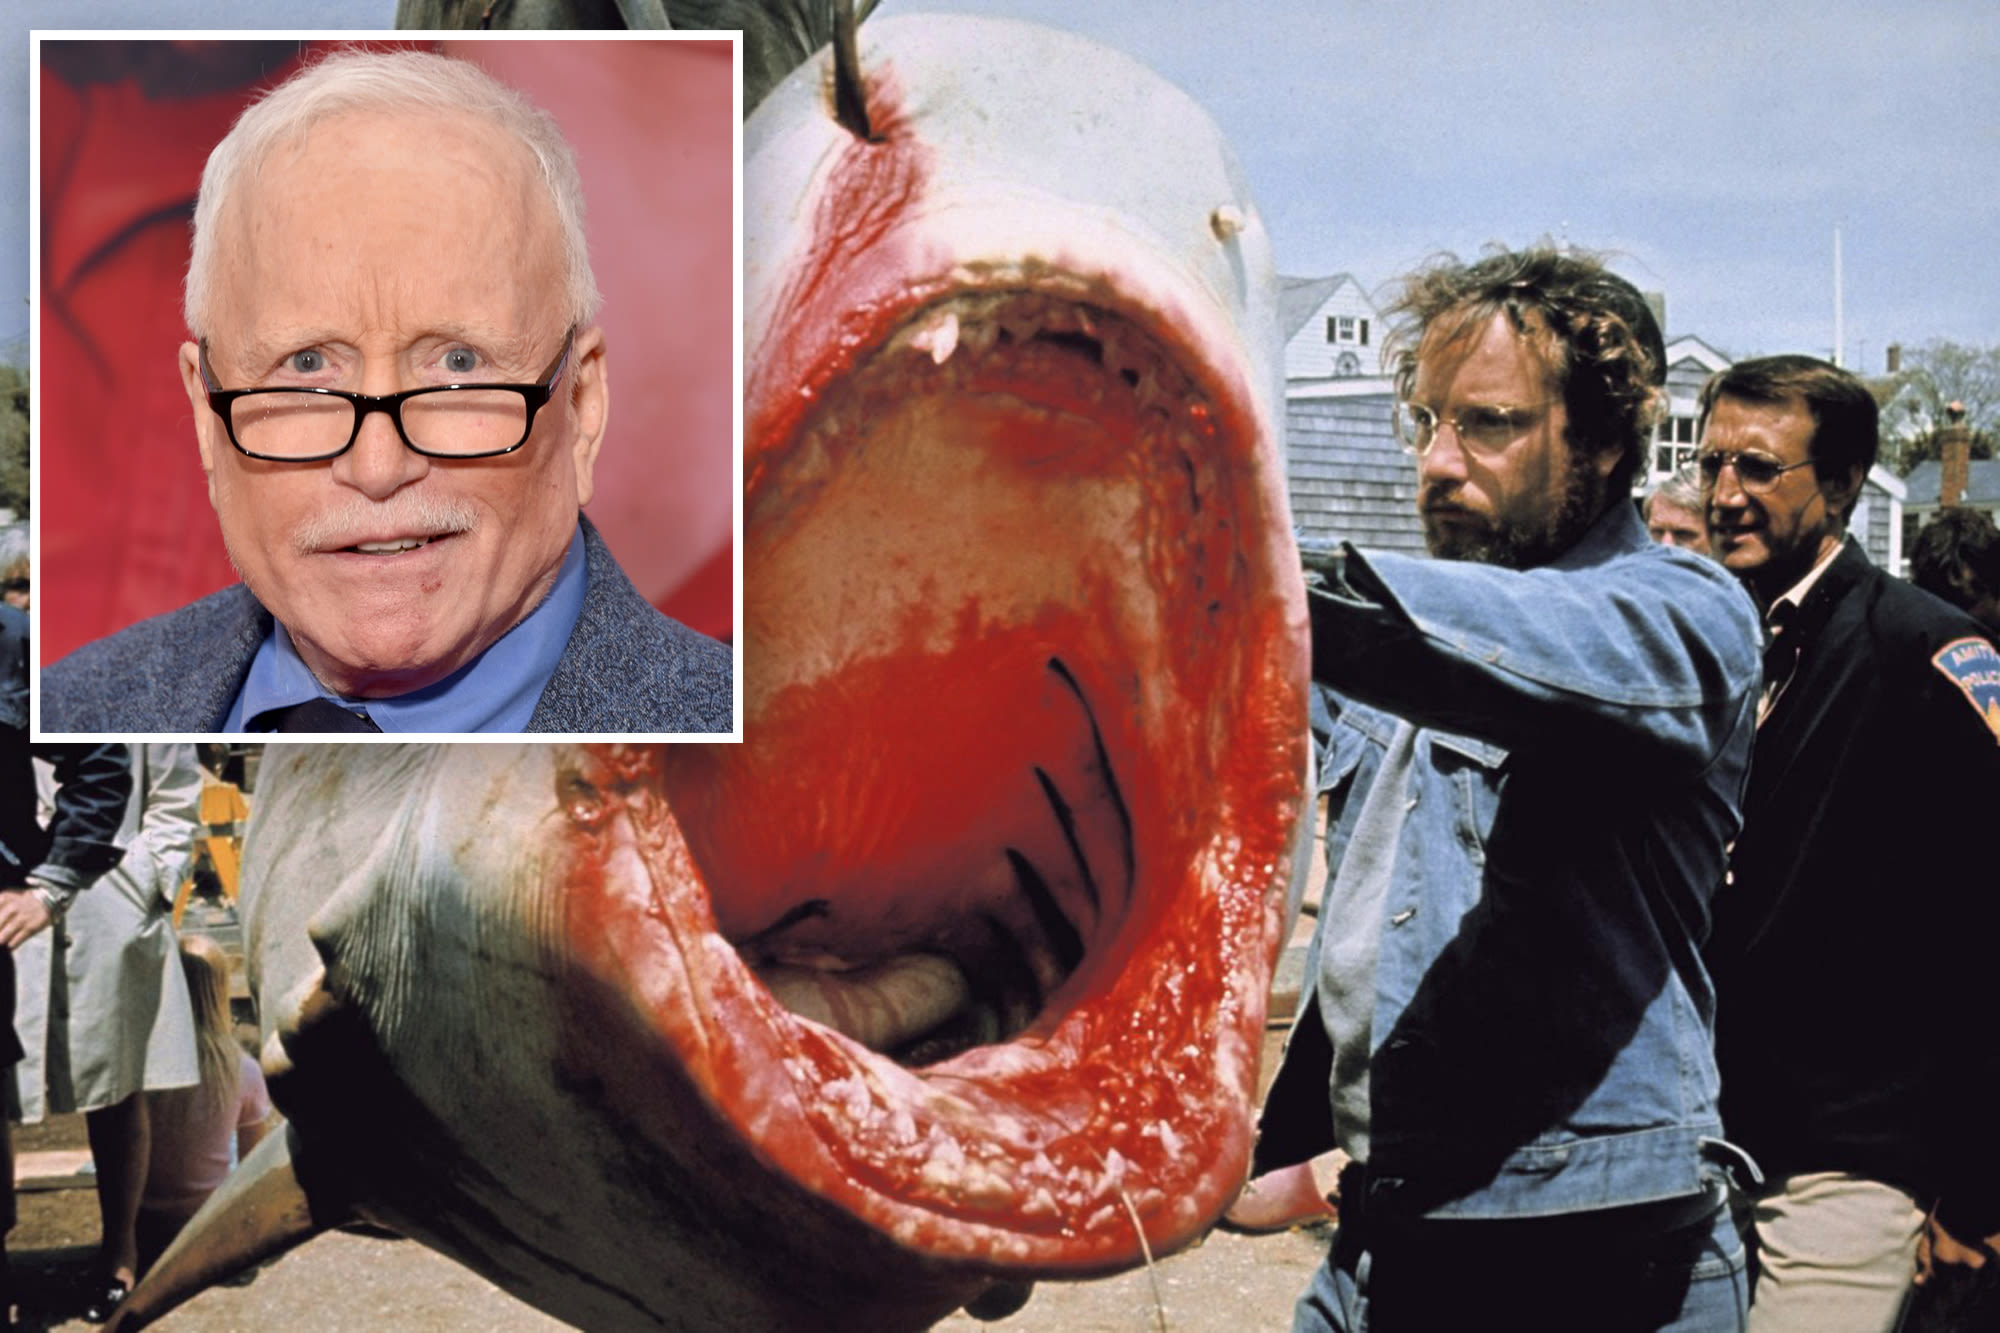 Richard Dreyfuss slammed over alleged sexist, homophobic remarks at ‘Jaws’ screening: ‘We walked out’